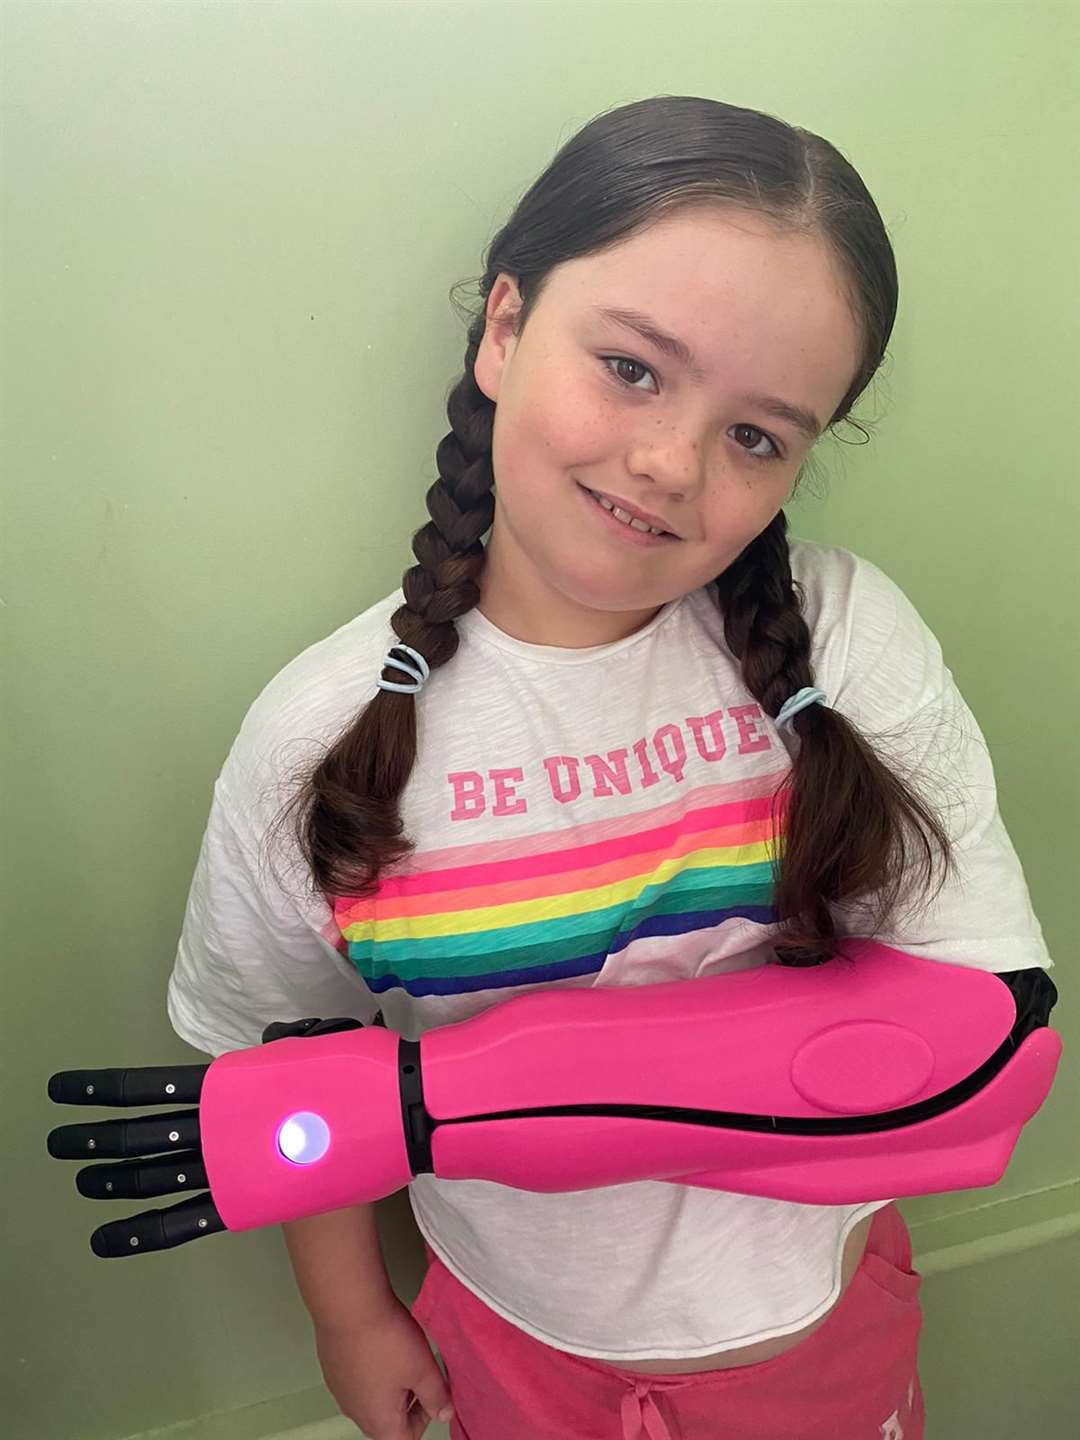 Tallulah’s bionic arm was funded by a donor (Open Bionics/PA)